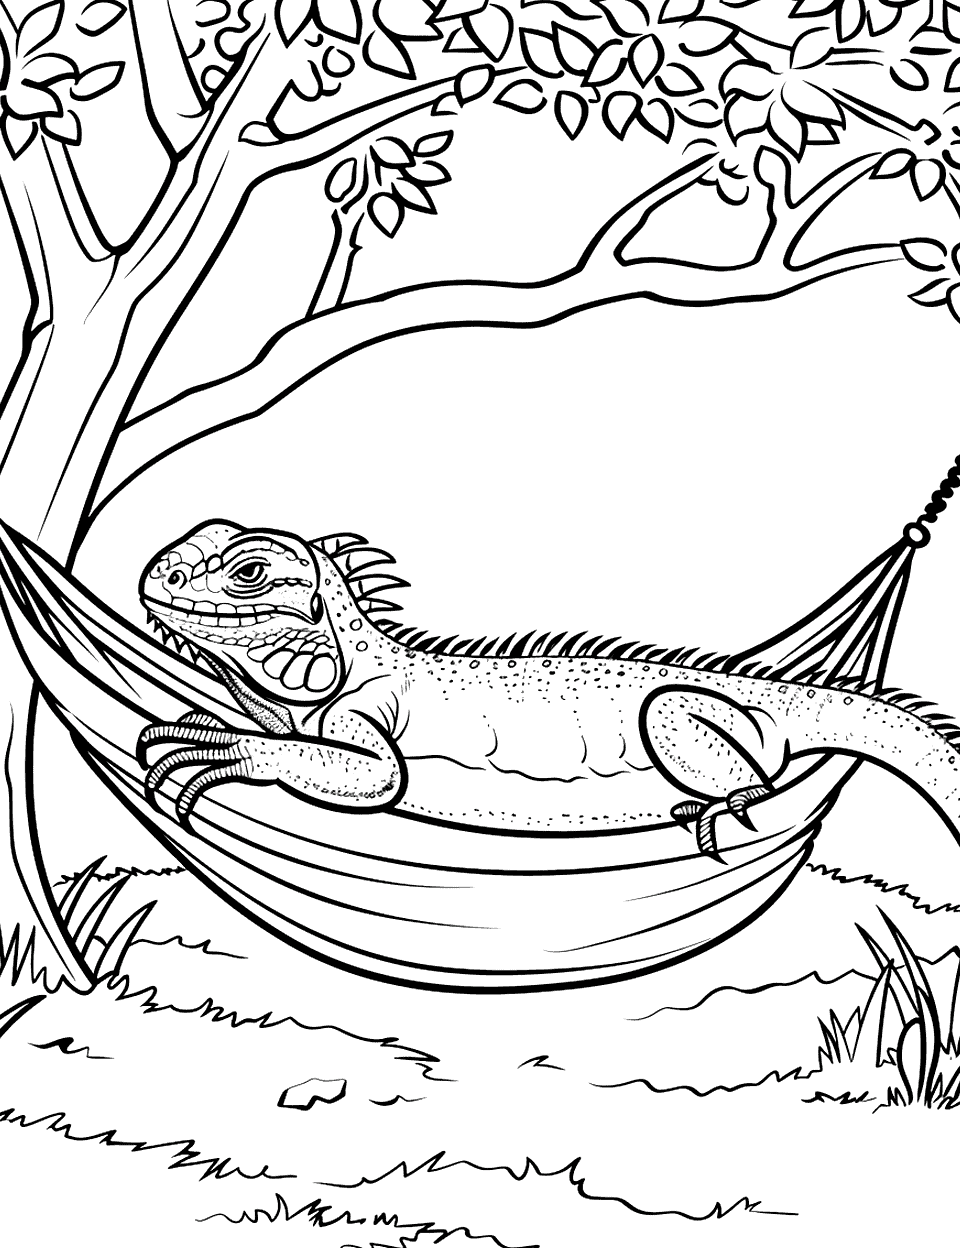 Iguana in a Hammock Lizard Coloring Page - An iguana lying comfortably in a hammock strung between two trees.